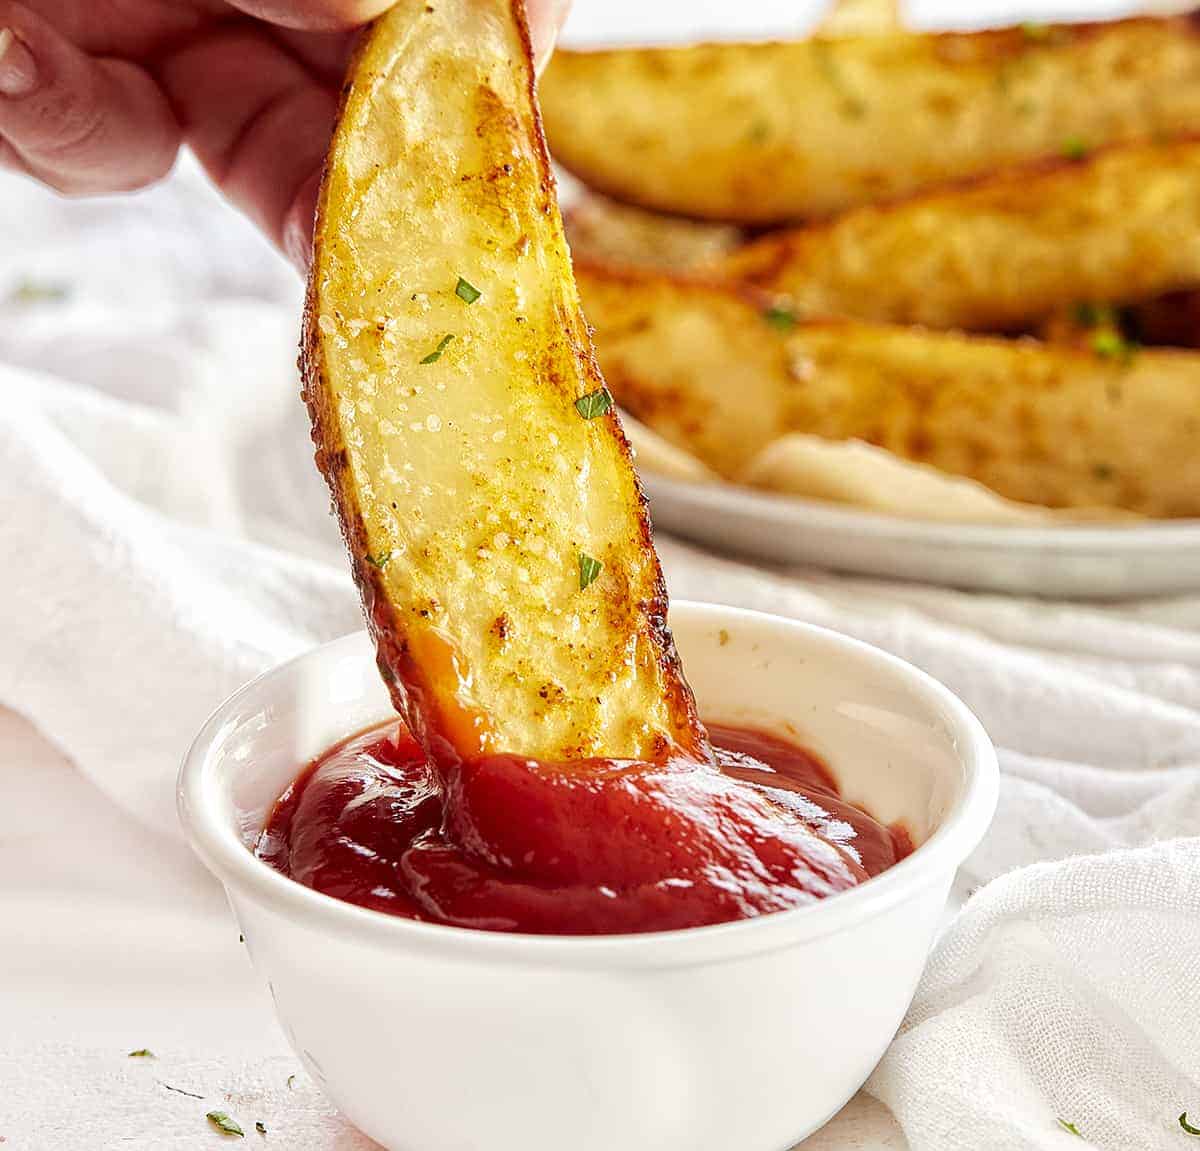 Dipping Roasted Potato Wedges